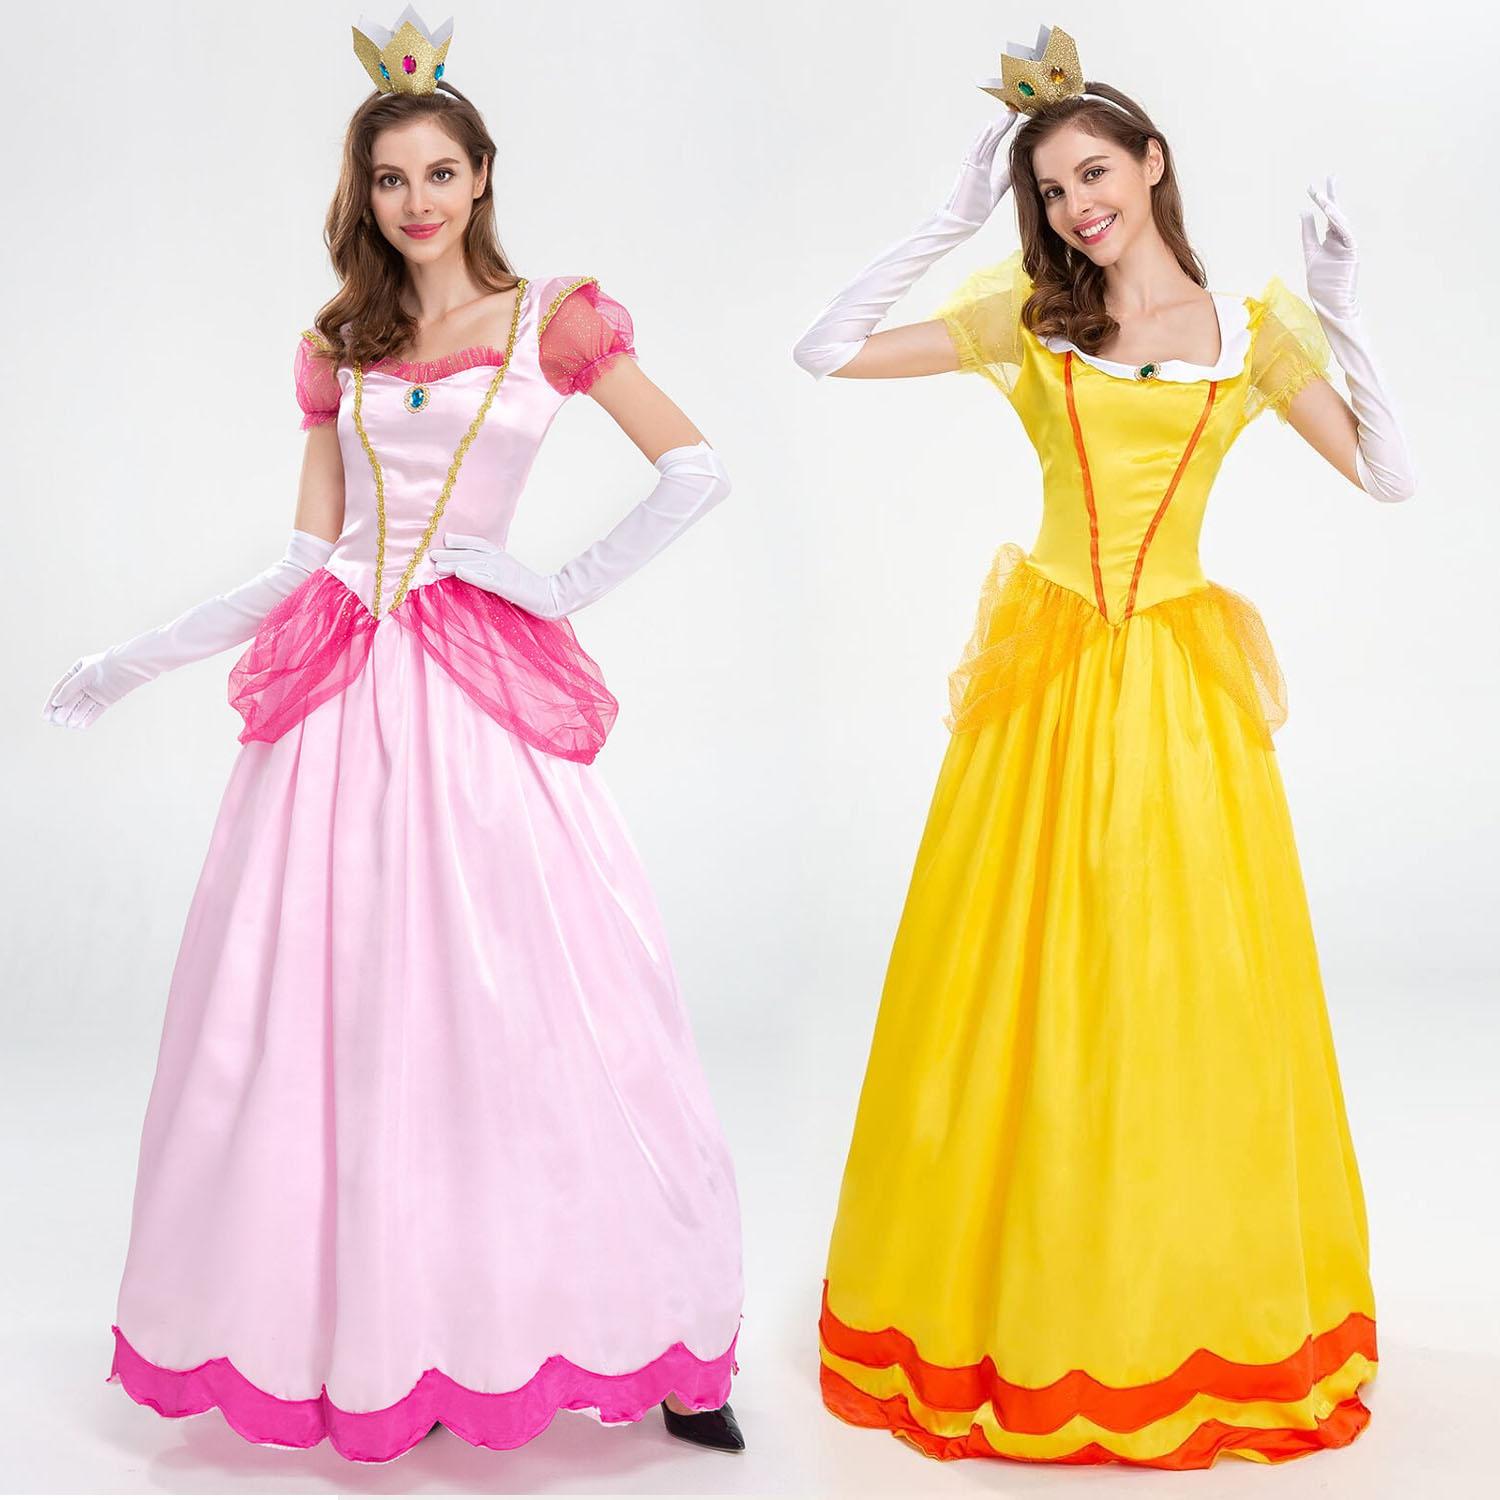 PYJYP Cosplay Palace Sweet Pink Princess Dress Peach Girls Costume Women Cosplay Halloween Mother Daugter Party Dress Up Clothing Fancy Dress Adult